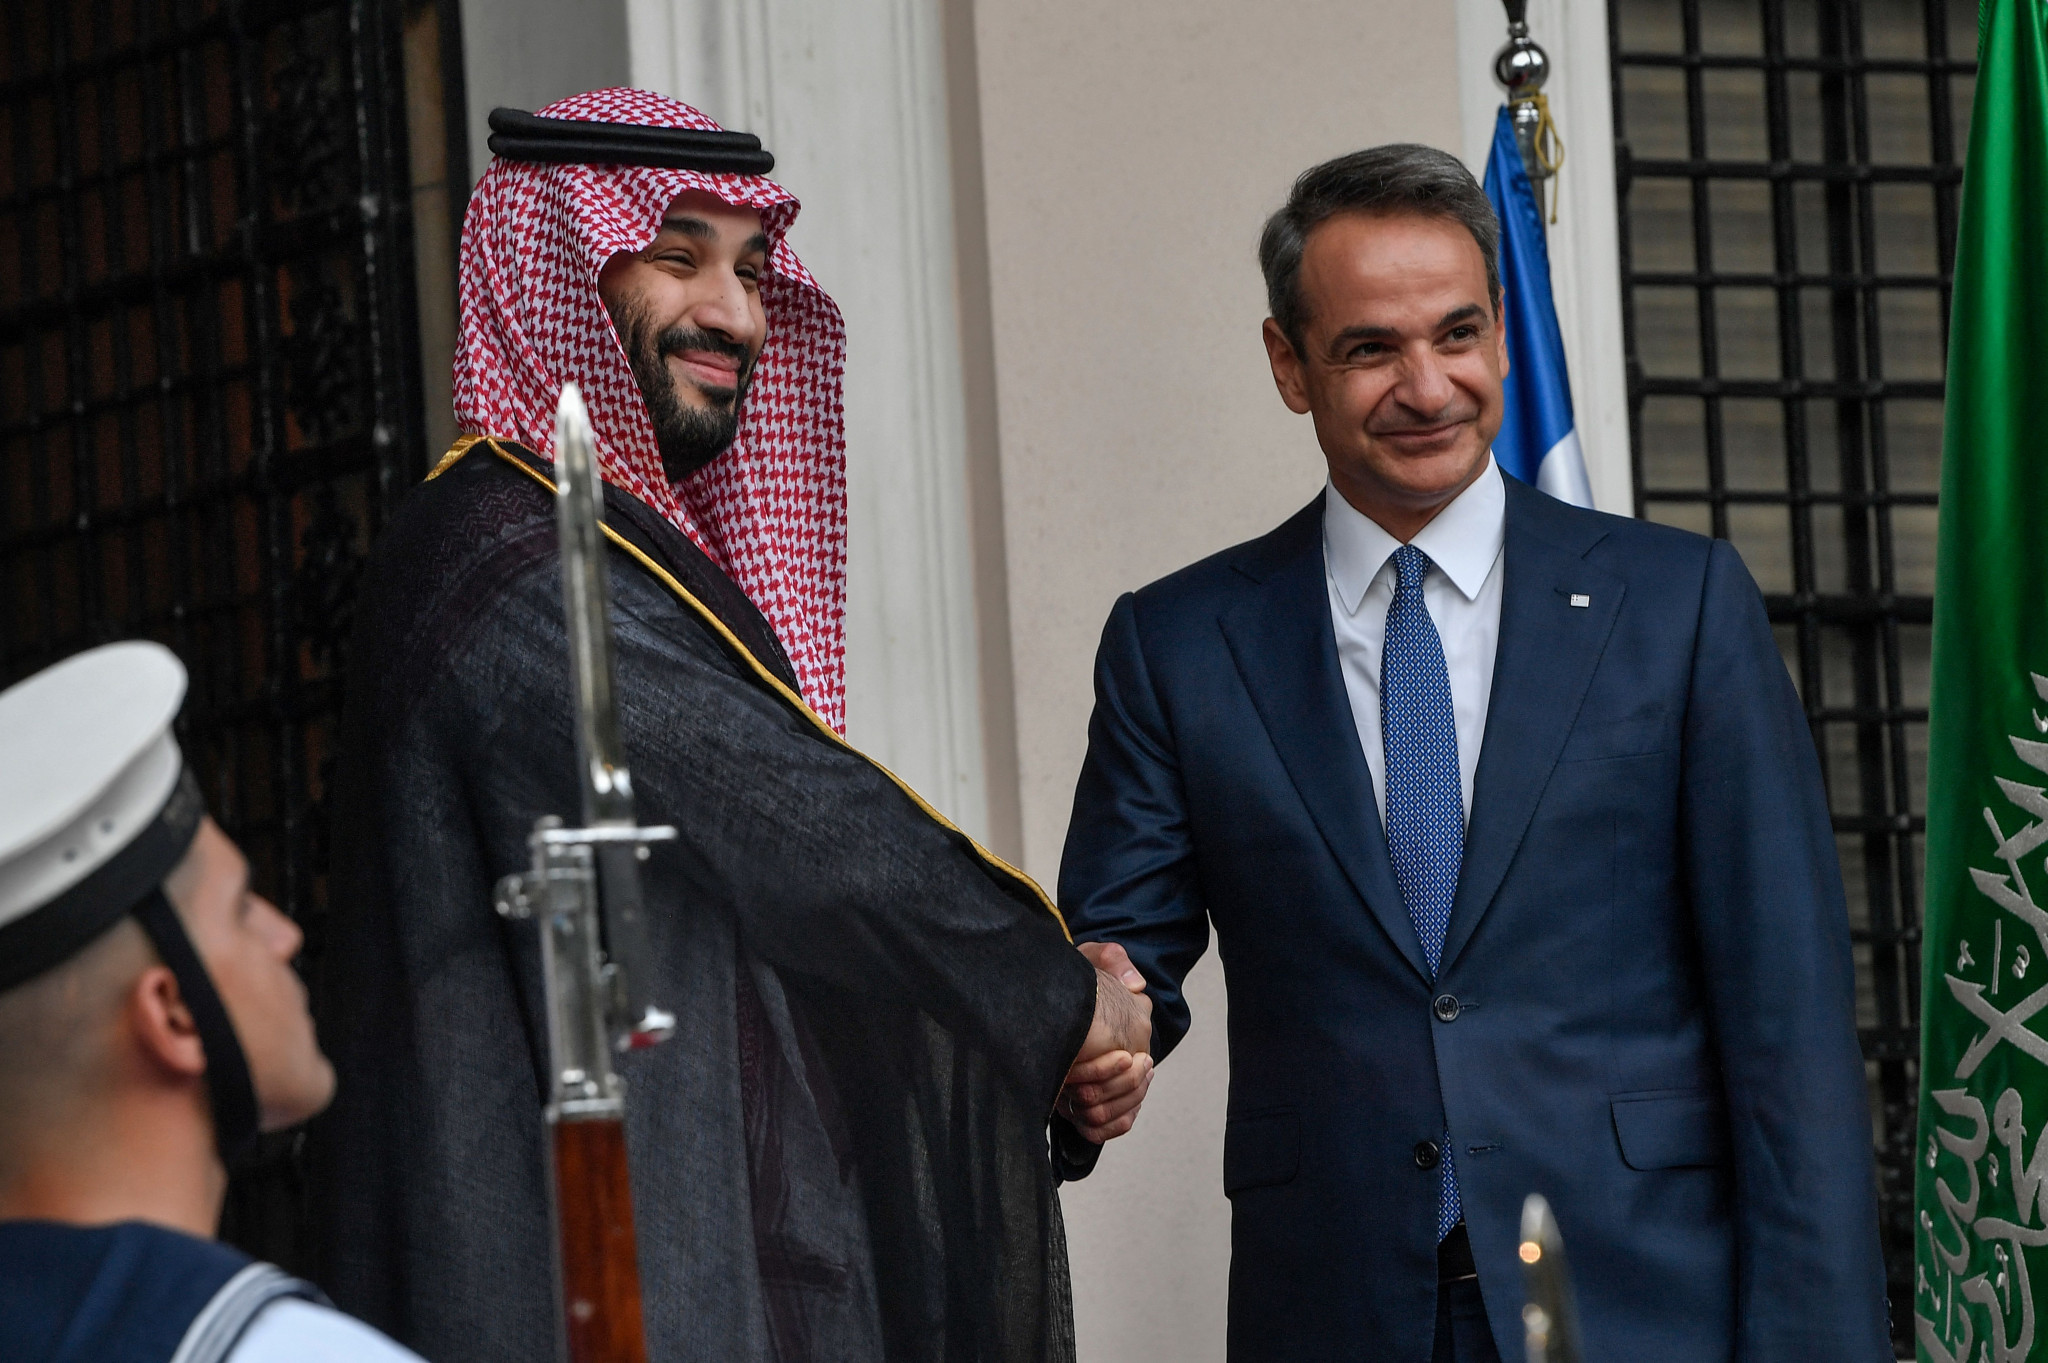 Crown Prince Mohammed bin Salman, left, is reported to have discussed the offer for the 2030 FIFA World Cup with Greek Prime Minister Kyriakos Mitsotakis, right ©Getty Images